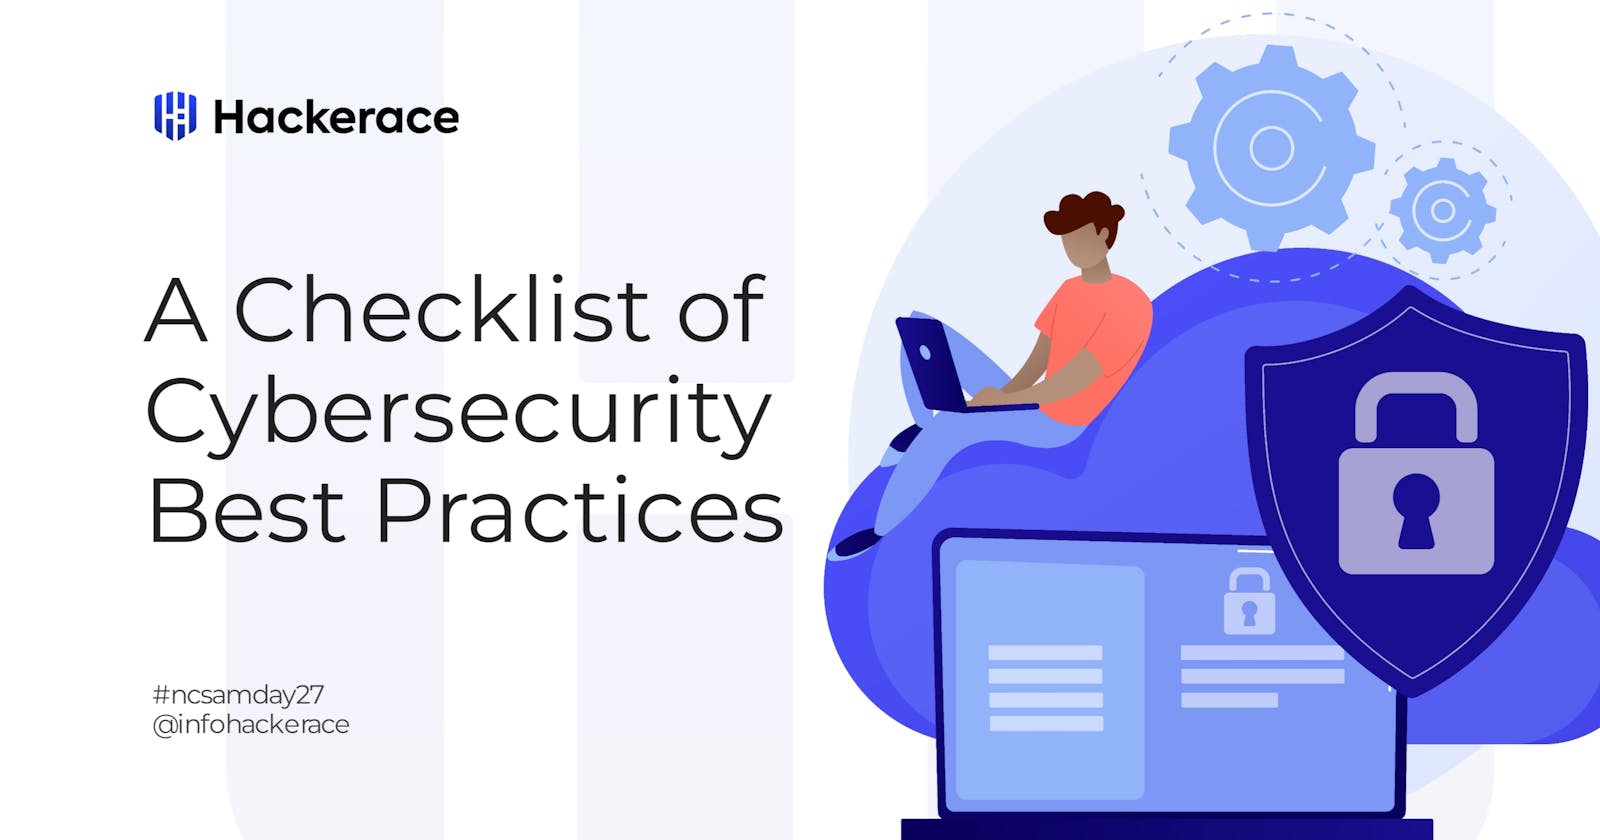 A Checklist of Cybersecurity Best Practices